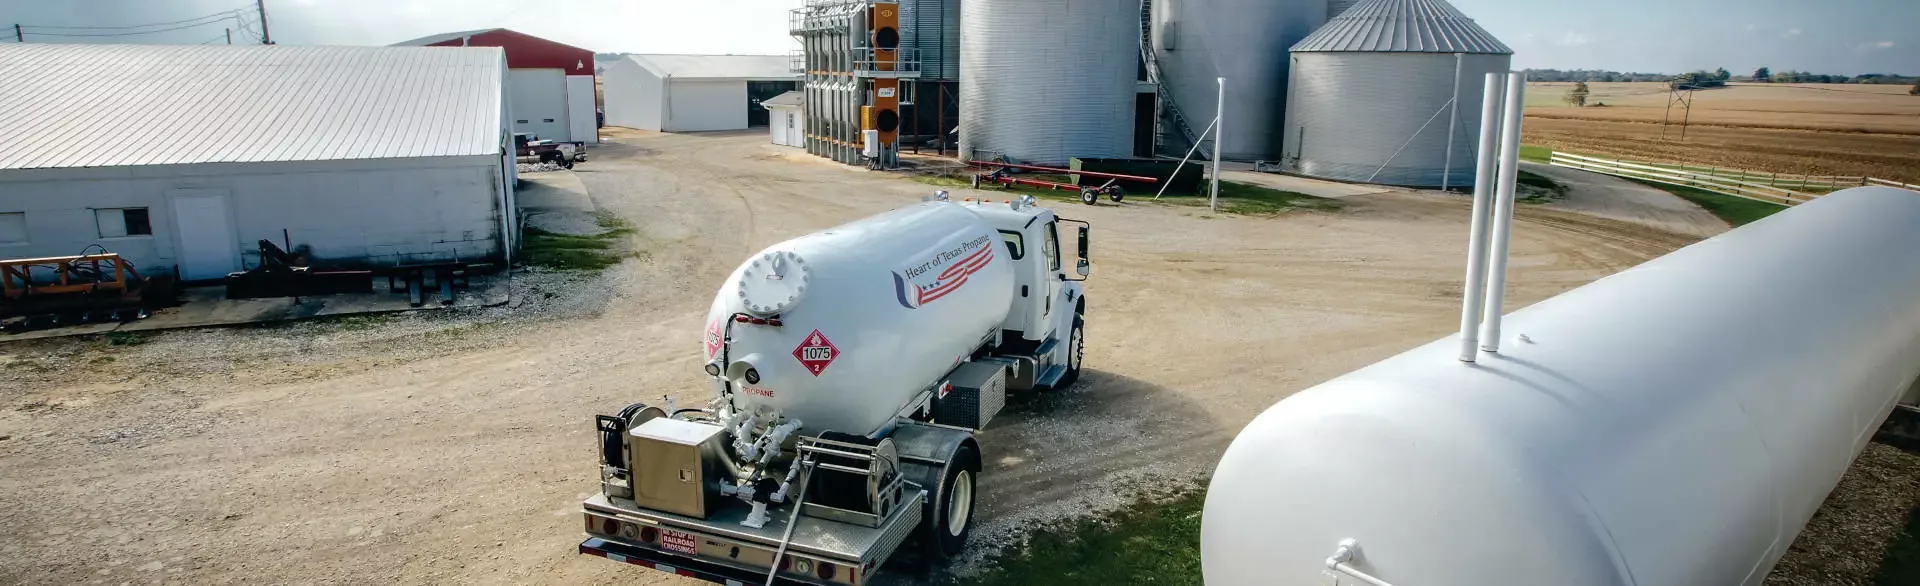 Commercial Propane Delivery